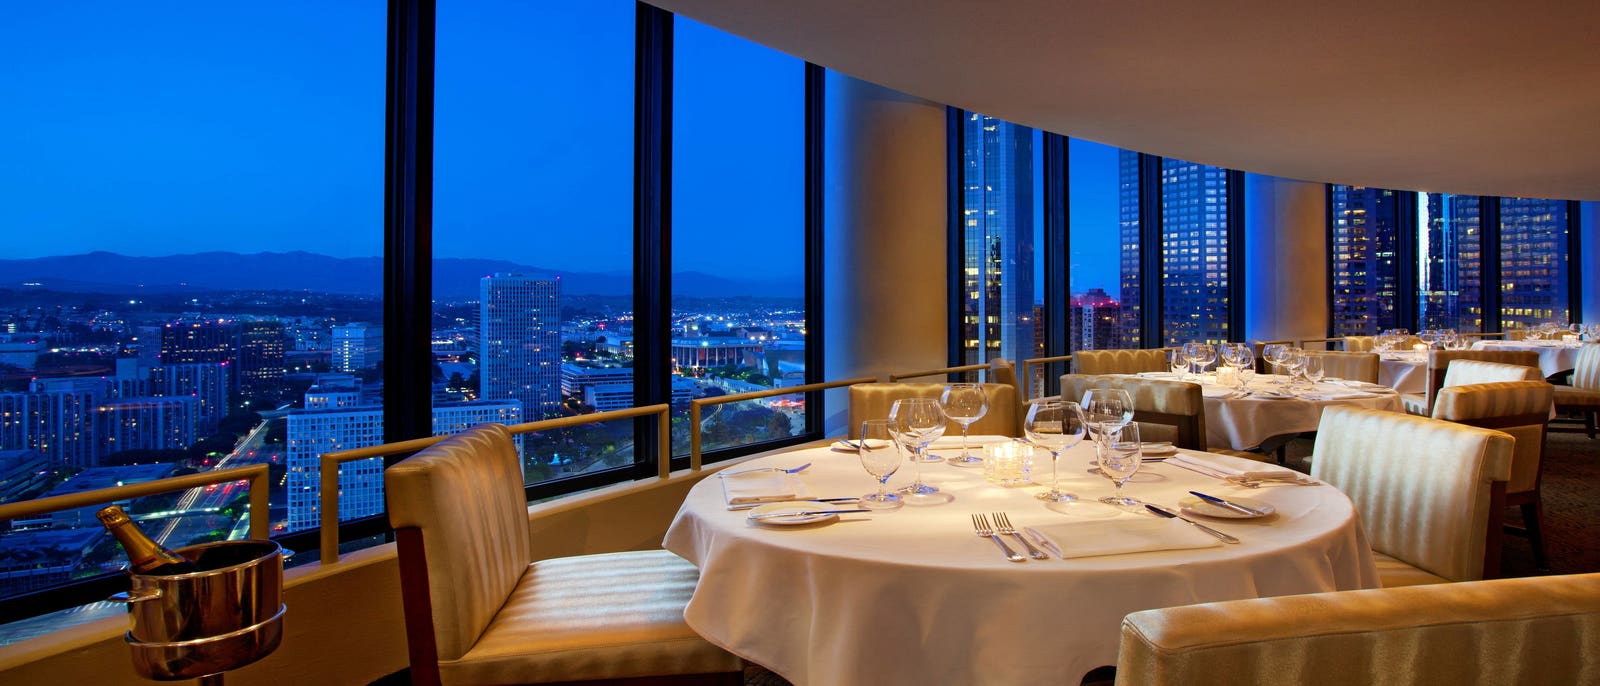 The Best Restaurants with a View in Los Angeles Discover Los Angeles